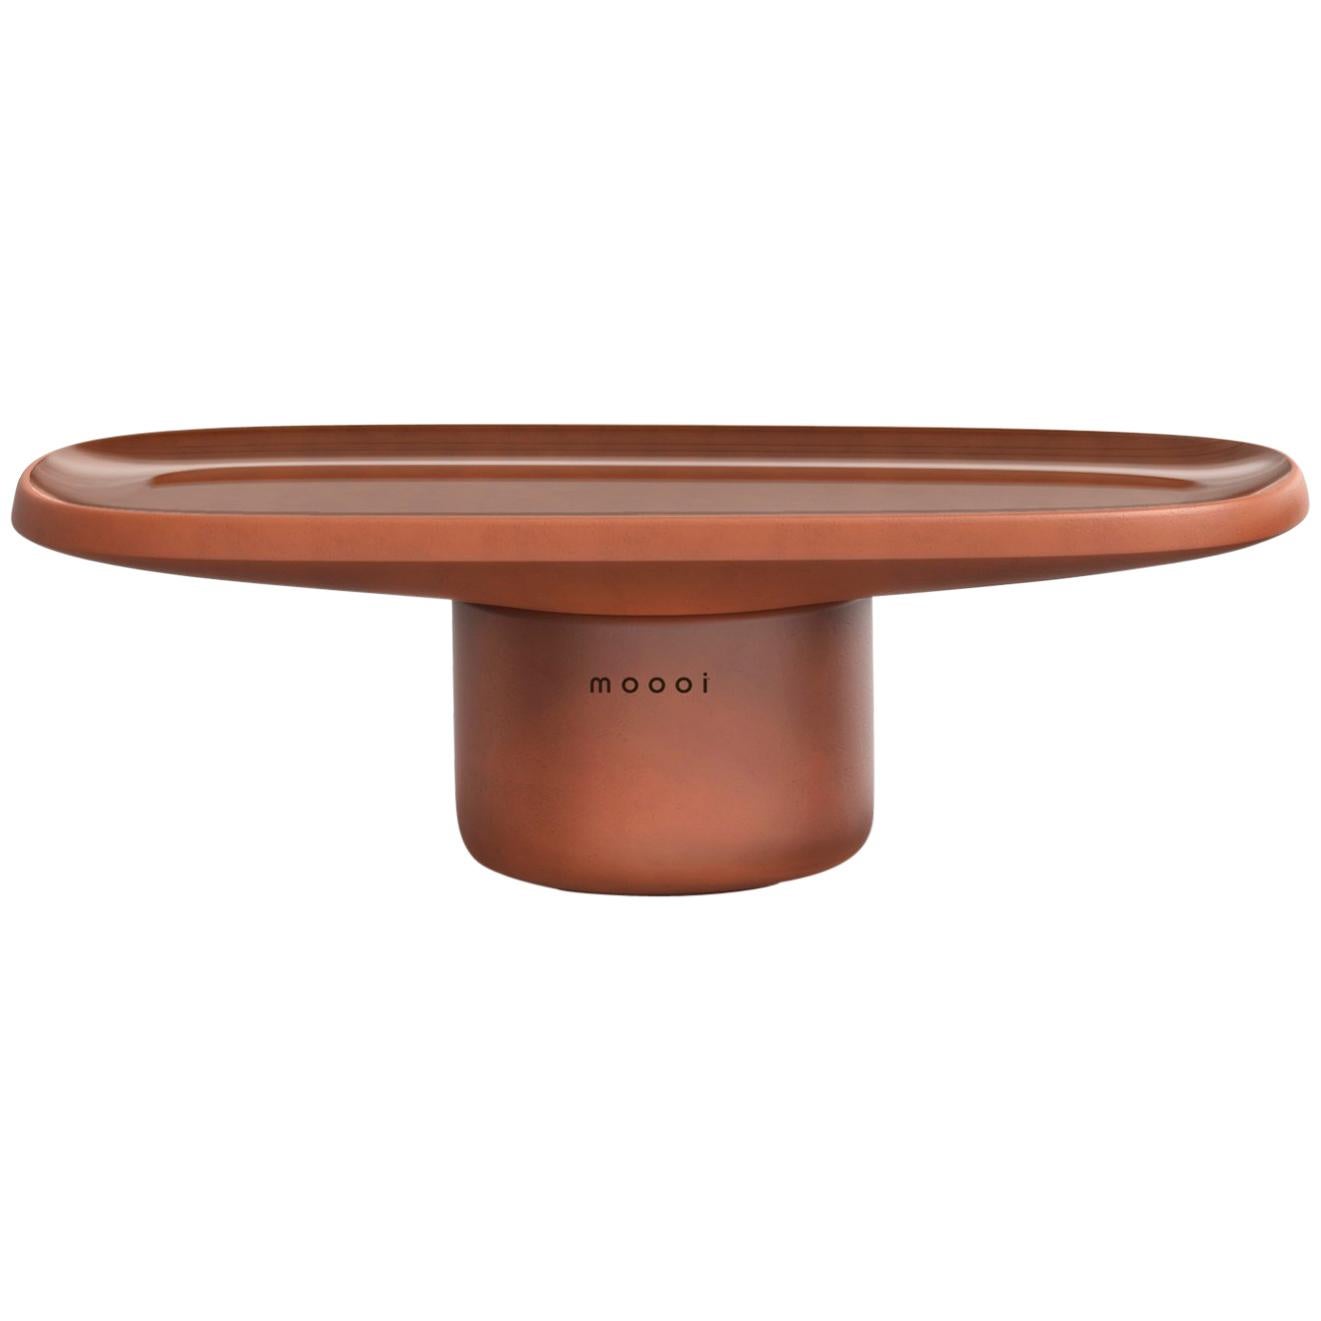 Obon Rectangular Low Table in Terracotta with Glazed Top by Simone Bonanni For Sale